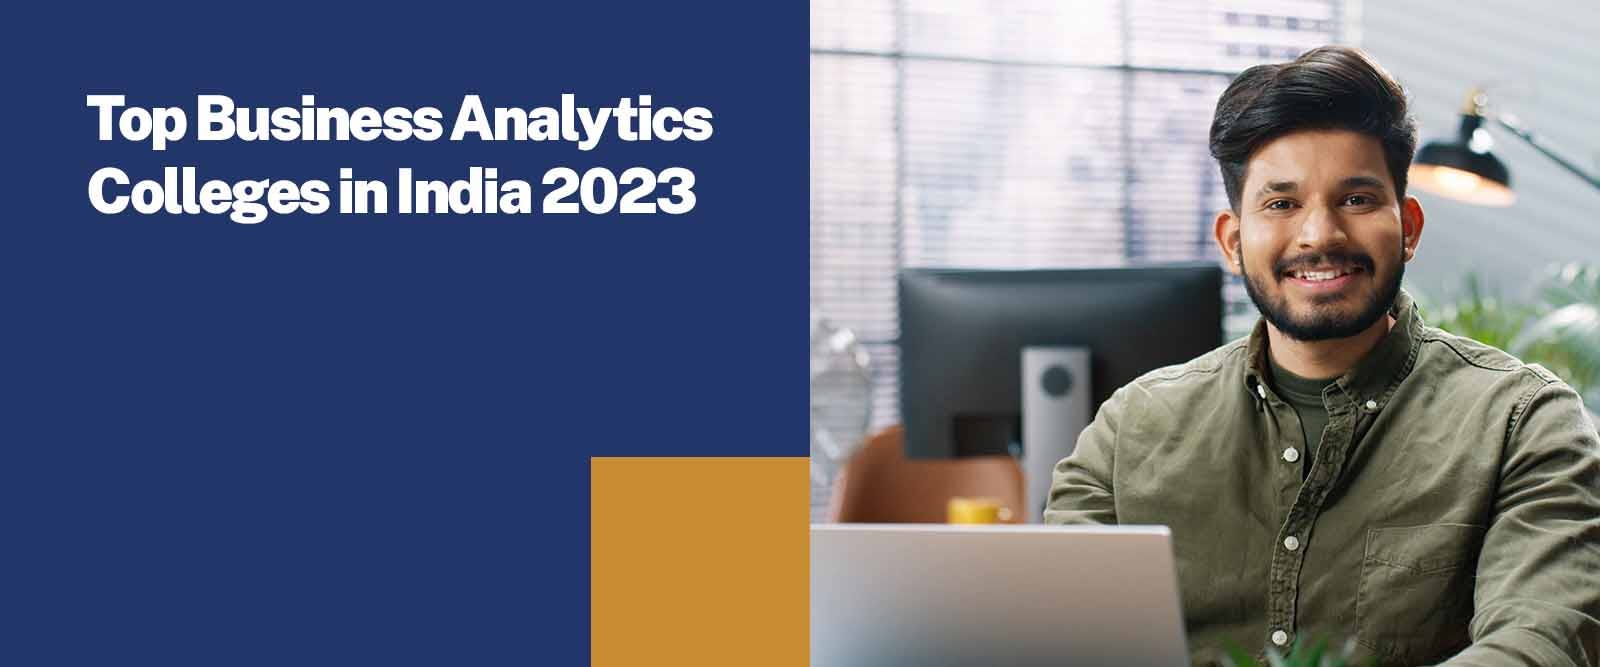 Top Business Analytics Colleges in India 